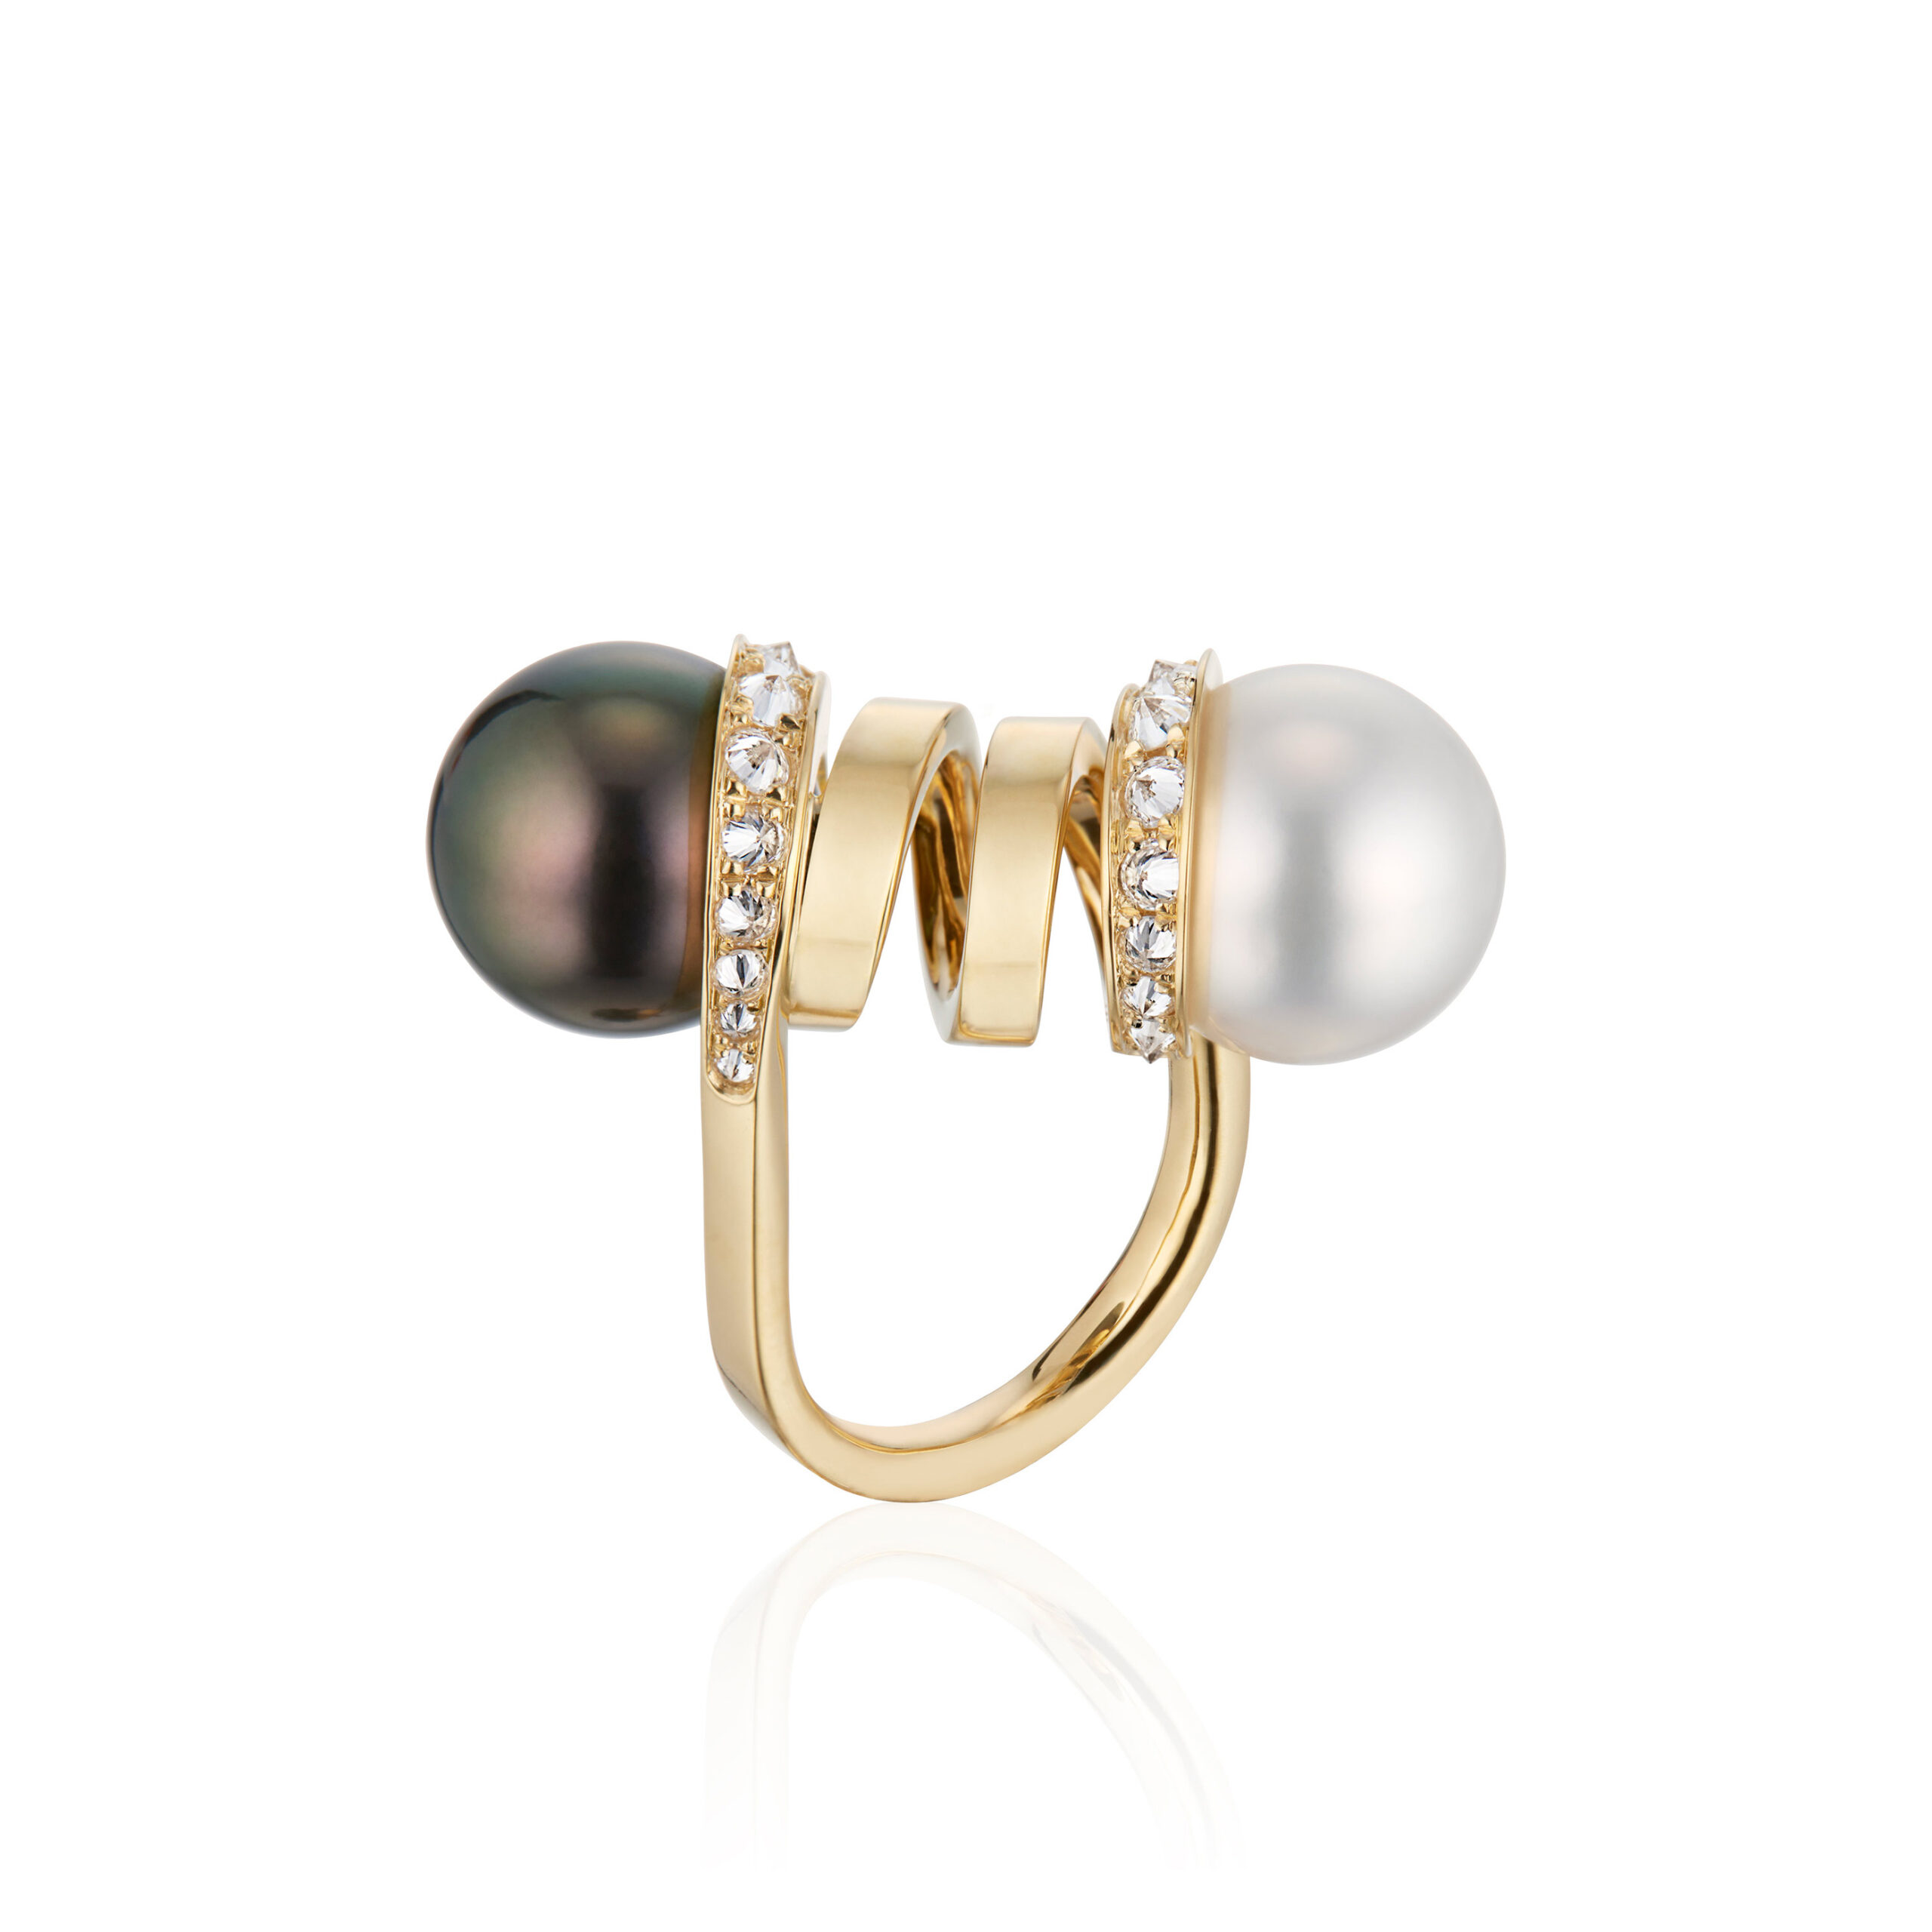 This is a profile photo of the Renisis Double Pearl Curl Ring, featuring 18K yellow gold with inverted diamonds and one white South Sea and one black Tahitian Pearl. Both contrasting pearls are on opposite side of the curled gold.